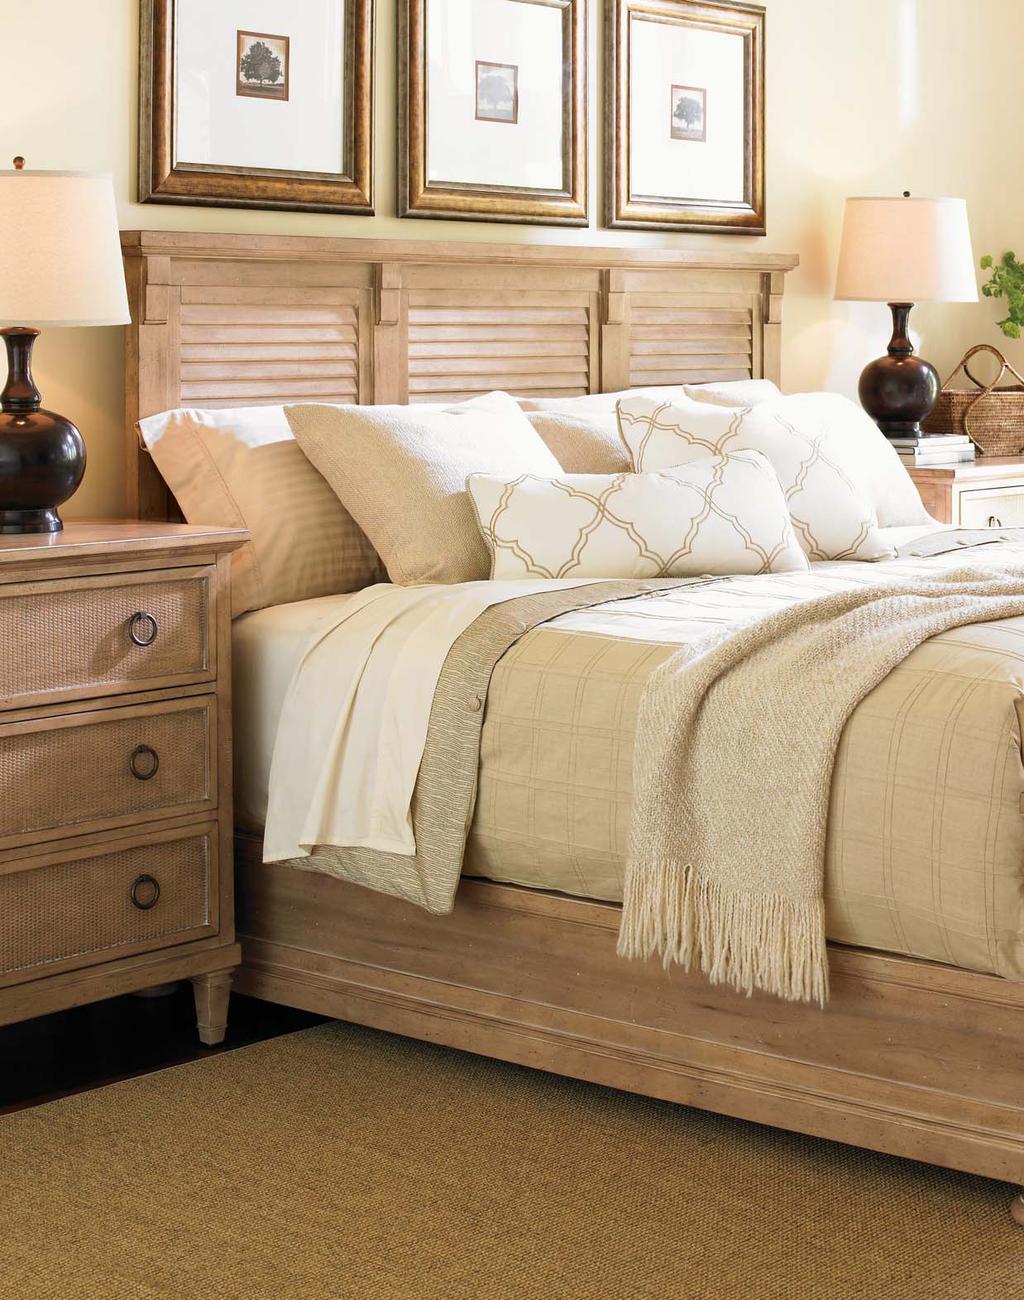 The Cypress Point bed features a louvered panel